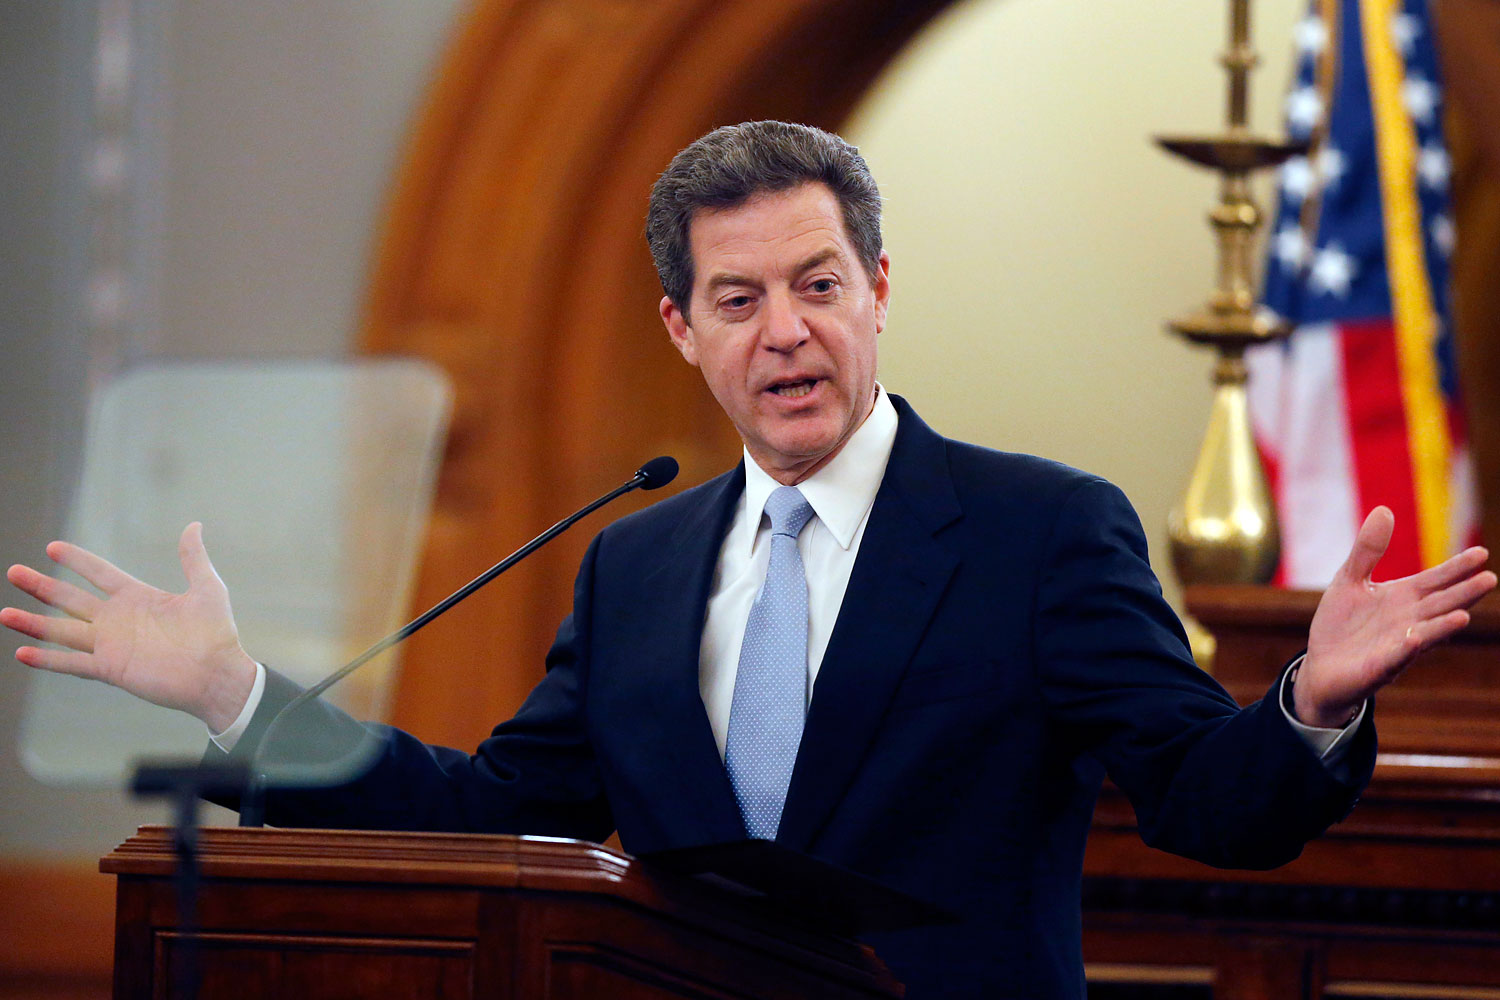 Kansas Gov. Sam Brownback delivers his State of the State speech to an annual joint session of the state House and Senate at the Statehouse in Topeka, Kan., Jan. 15, 2014. (Orlin Wagner—AP)